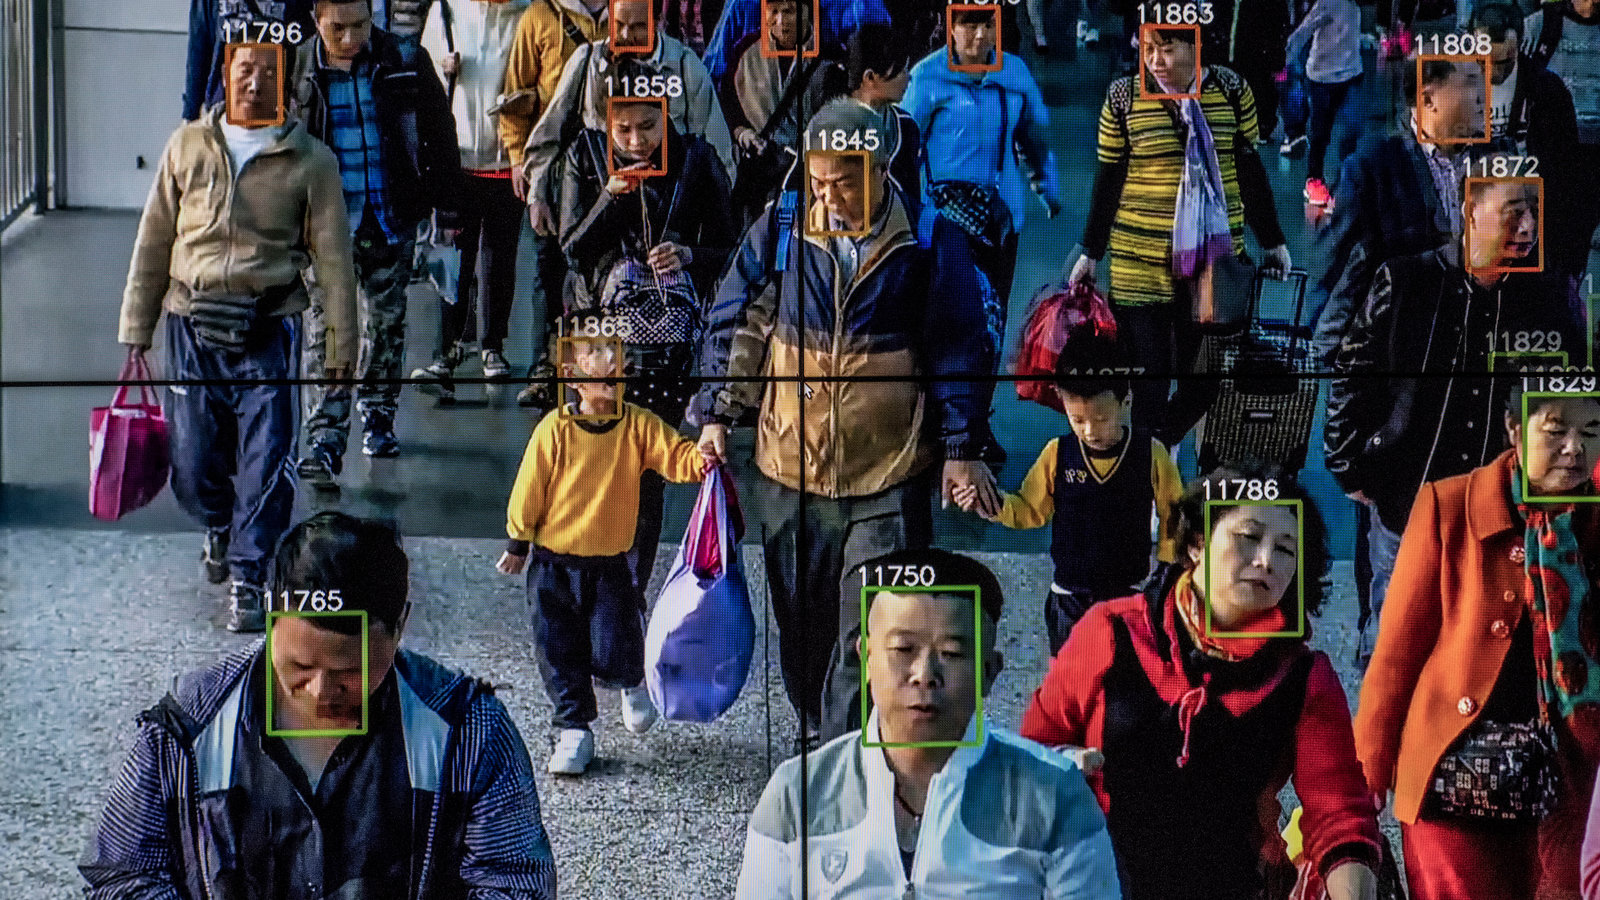 facial recognition used for governmental surveillance in China